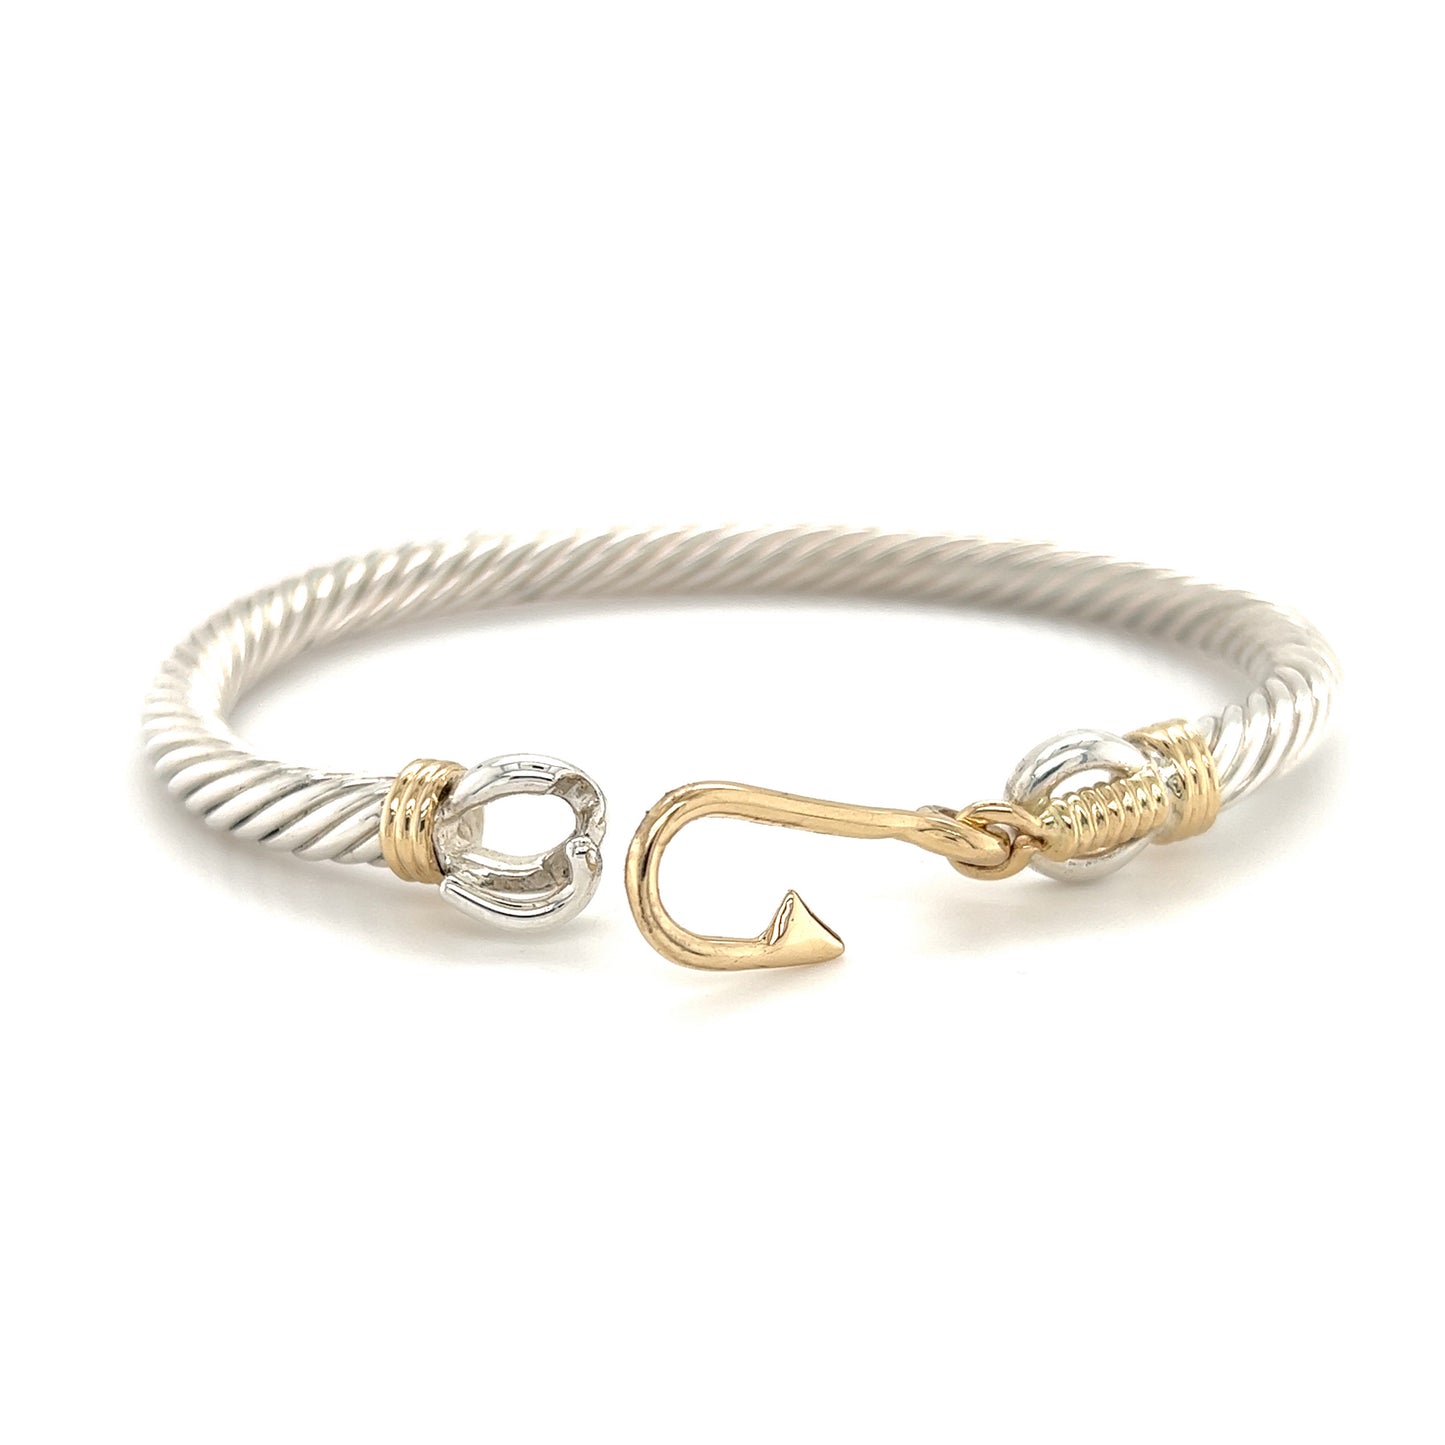 Fish Hook Cable Bangle Bracelet with 14K Wraps and Clasp in Sterling Silver Front with Open Hook